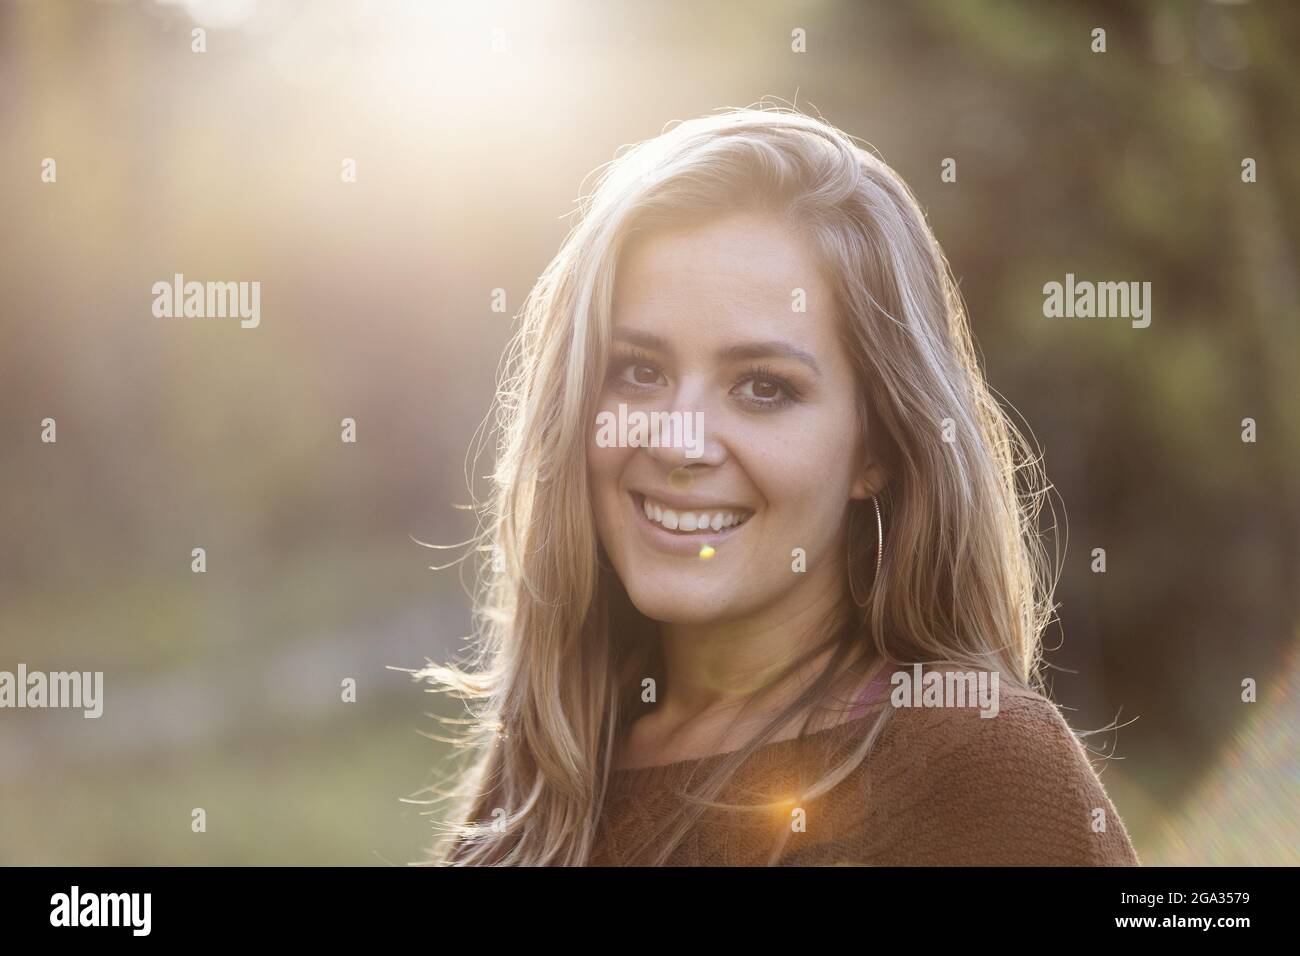 Portrait of a beautiful young woman in a city park; Edmonton, Alberta, Canada Stock Photo